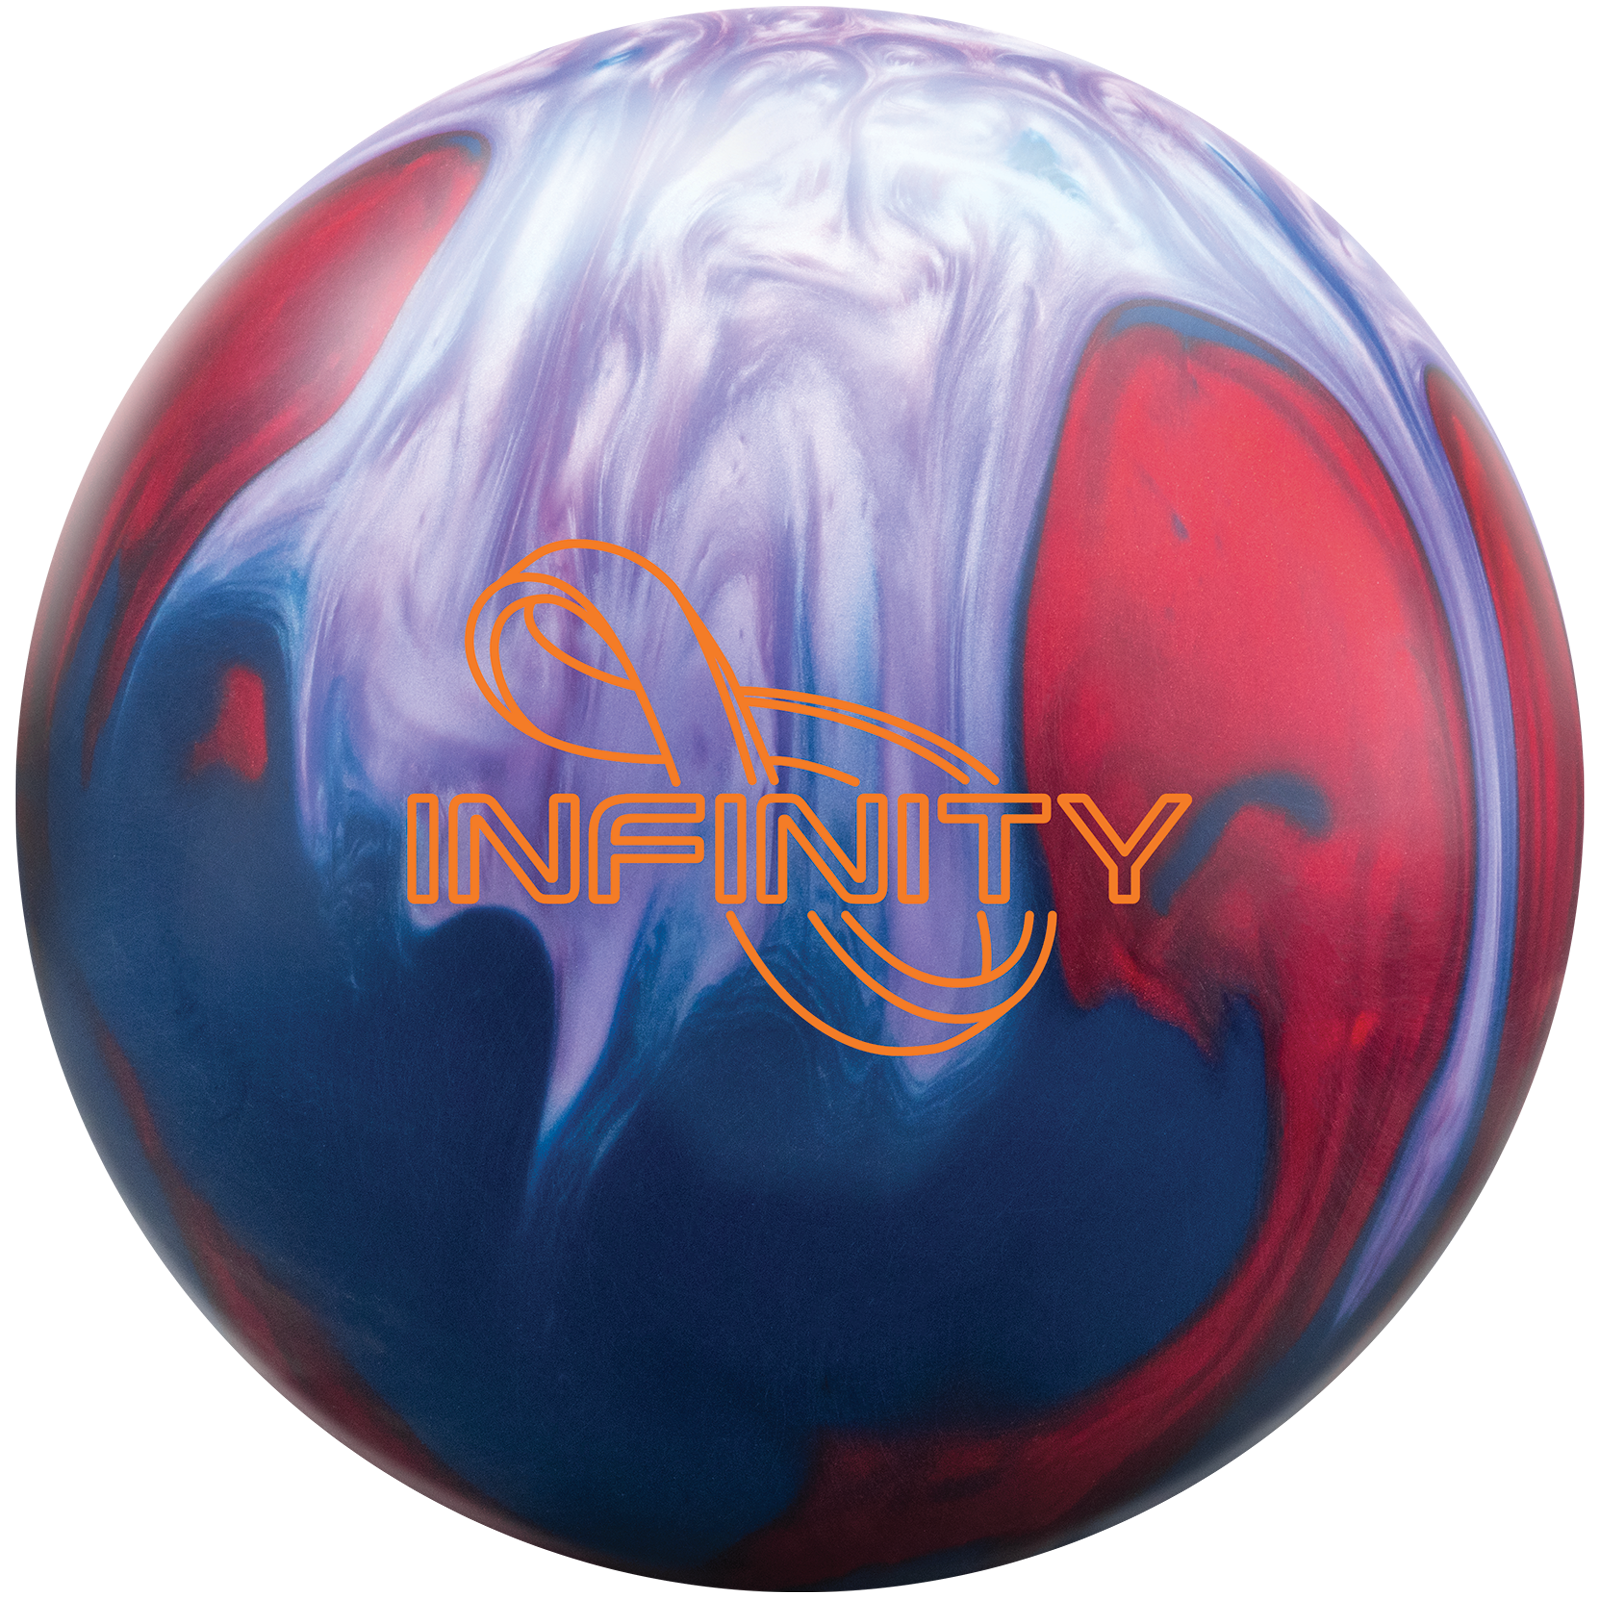 https://brunswickbowling.com/uploads/bowler_products/Products/Balls/High/Infinity_1600x1600.png